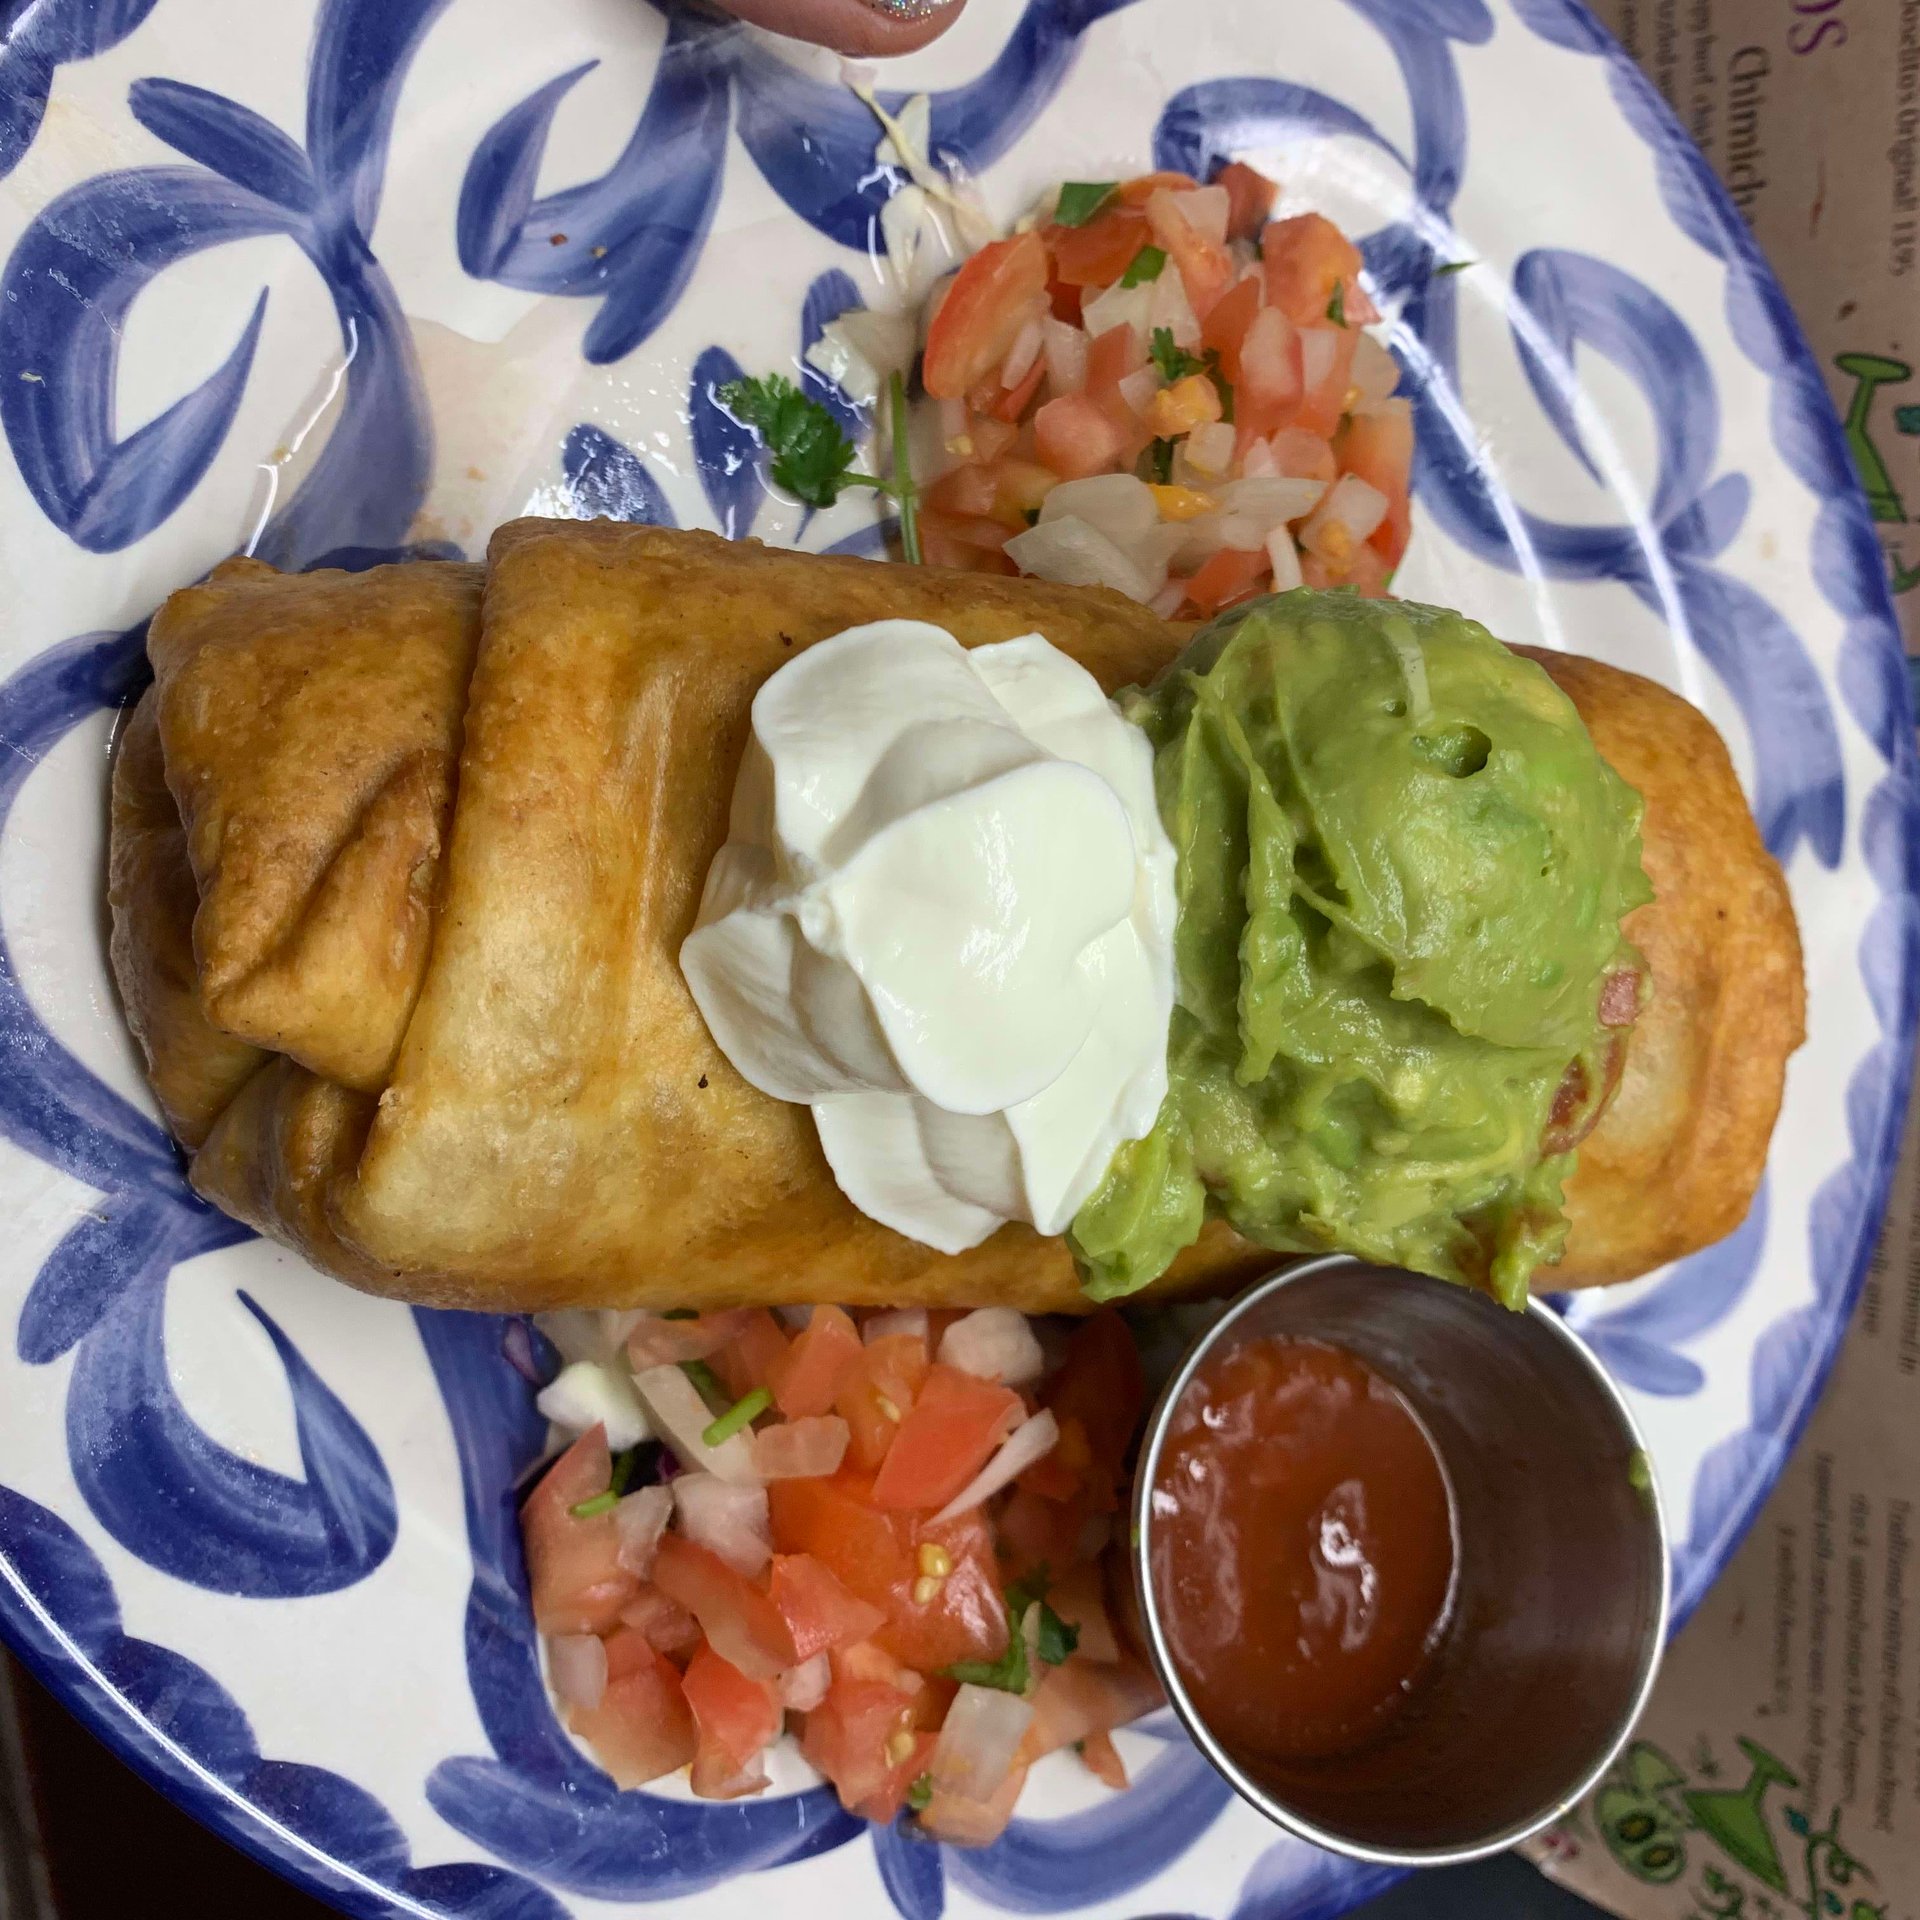 The chimichanga in Mexican cuisine - Gastronomic Information